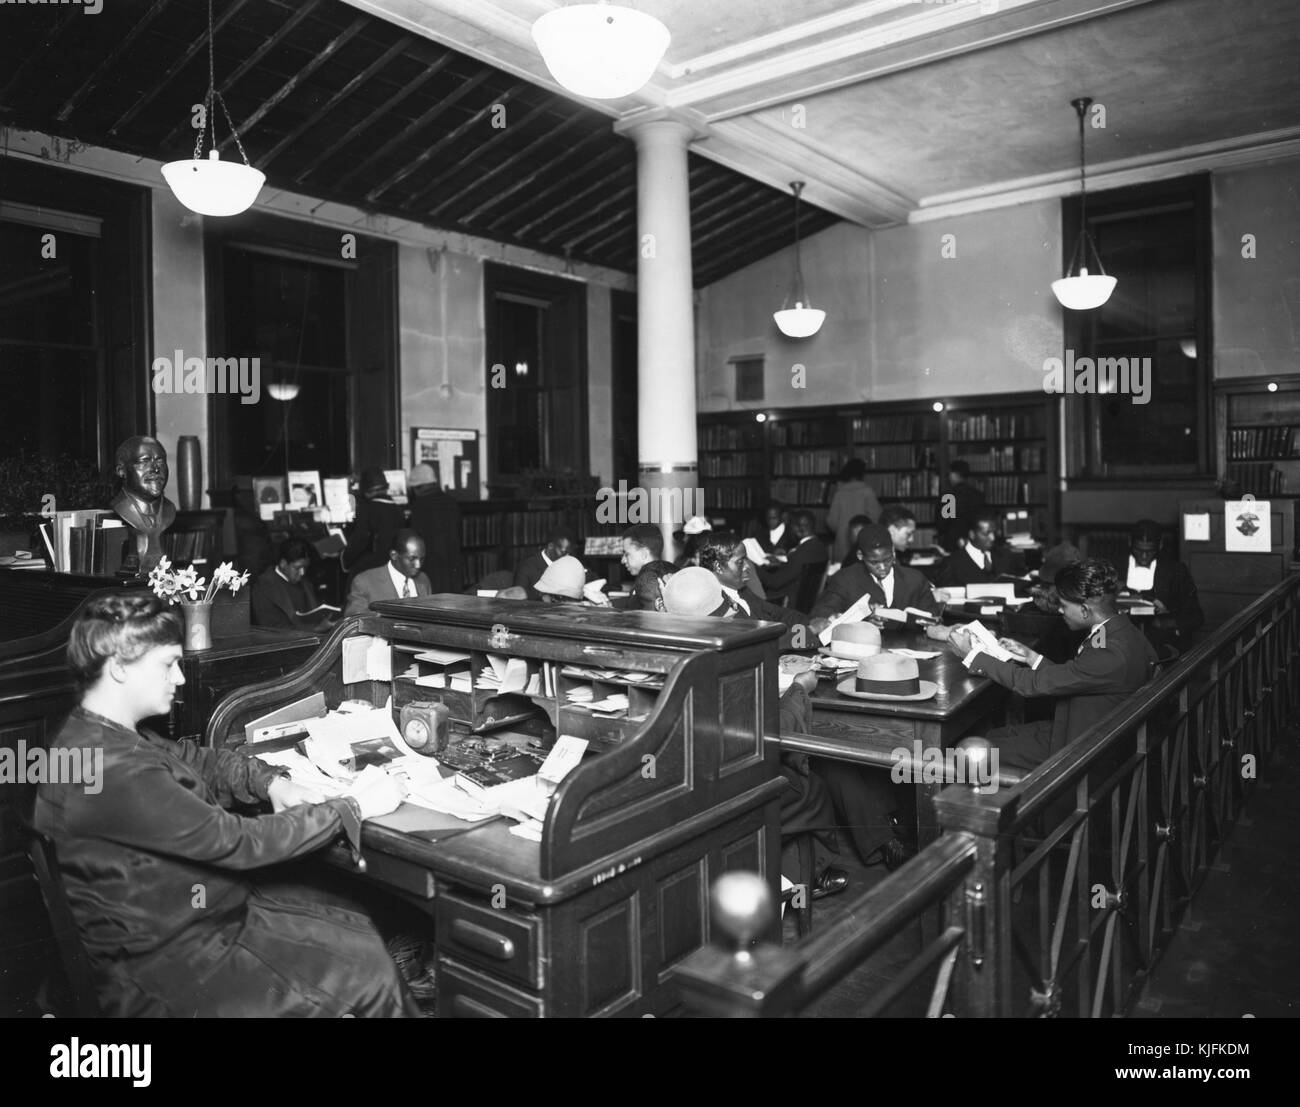 A photograph of Ernestine Rose working at the 135th Street branch of the New York City Public Library, she lead the library in activities that is credited with playing a large part in the Harlem Renaissance by having a book collection that connected the local black community to their history, they also organized events to connect readers with artists and performers, 1930. From the New York Public Library. Stock Photo